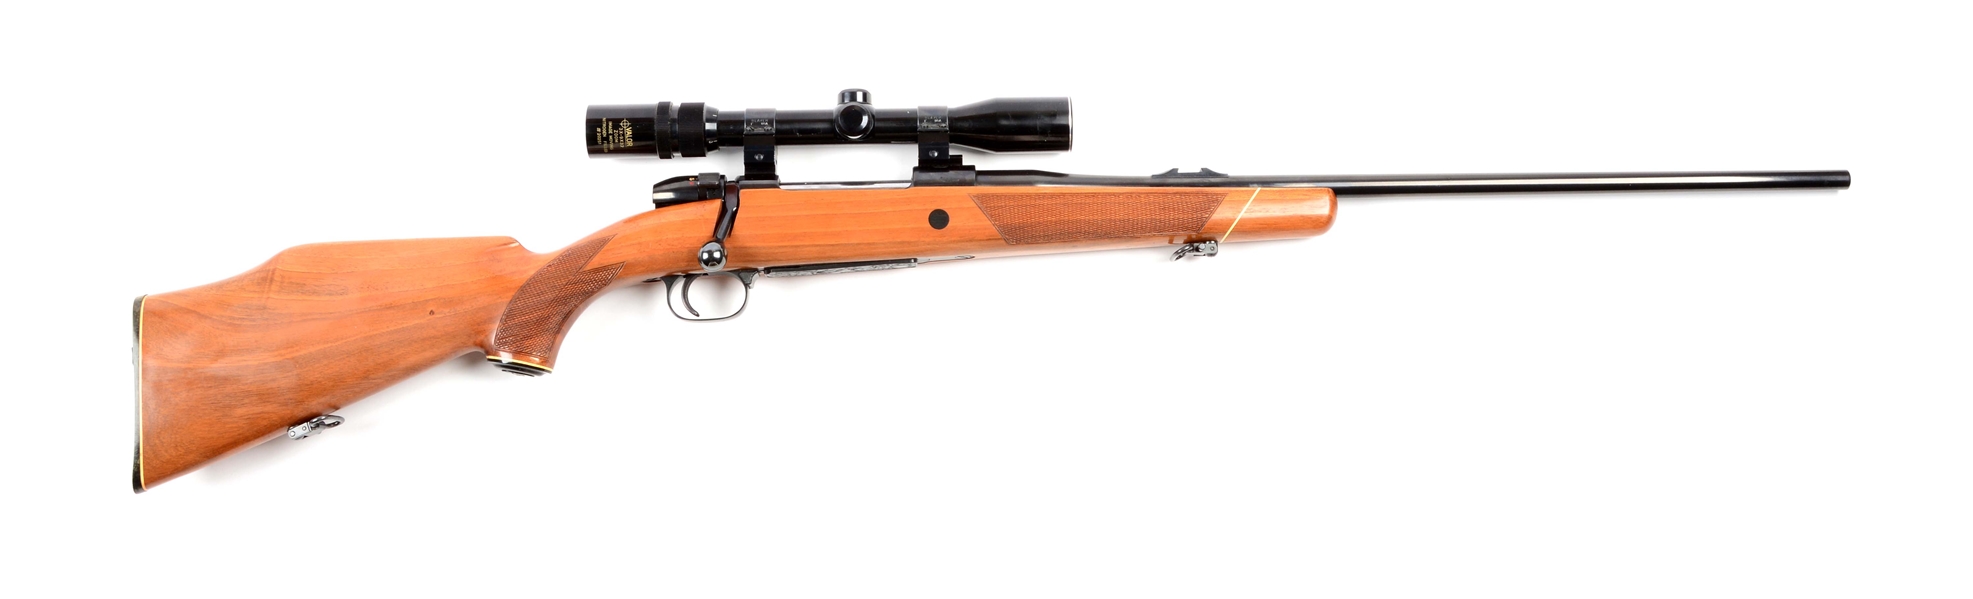 (M) MAUSER MODEL 2000 BOLT ACTION SPORTING RIFLE. 